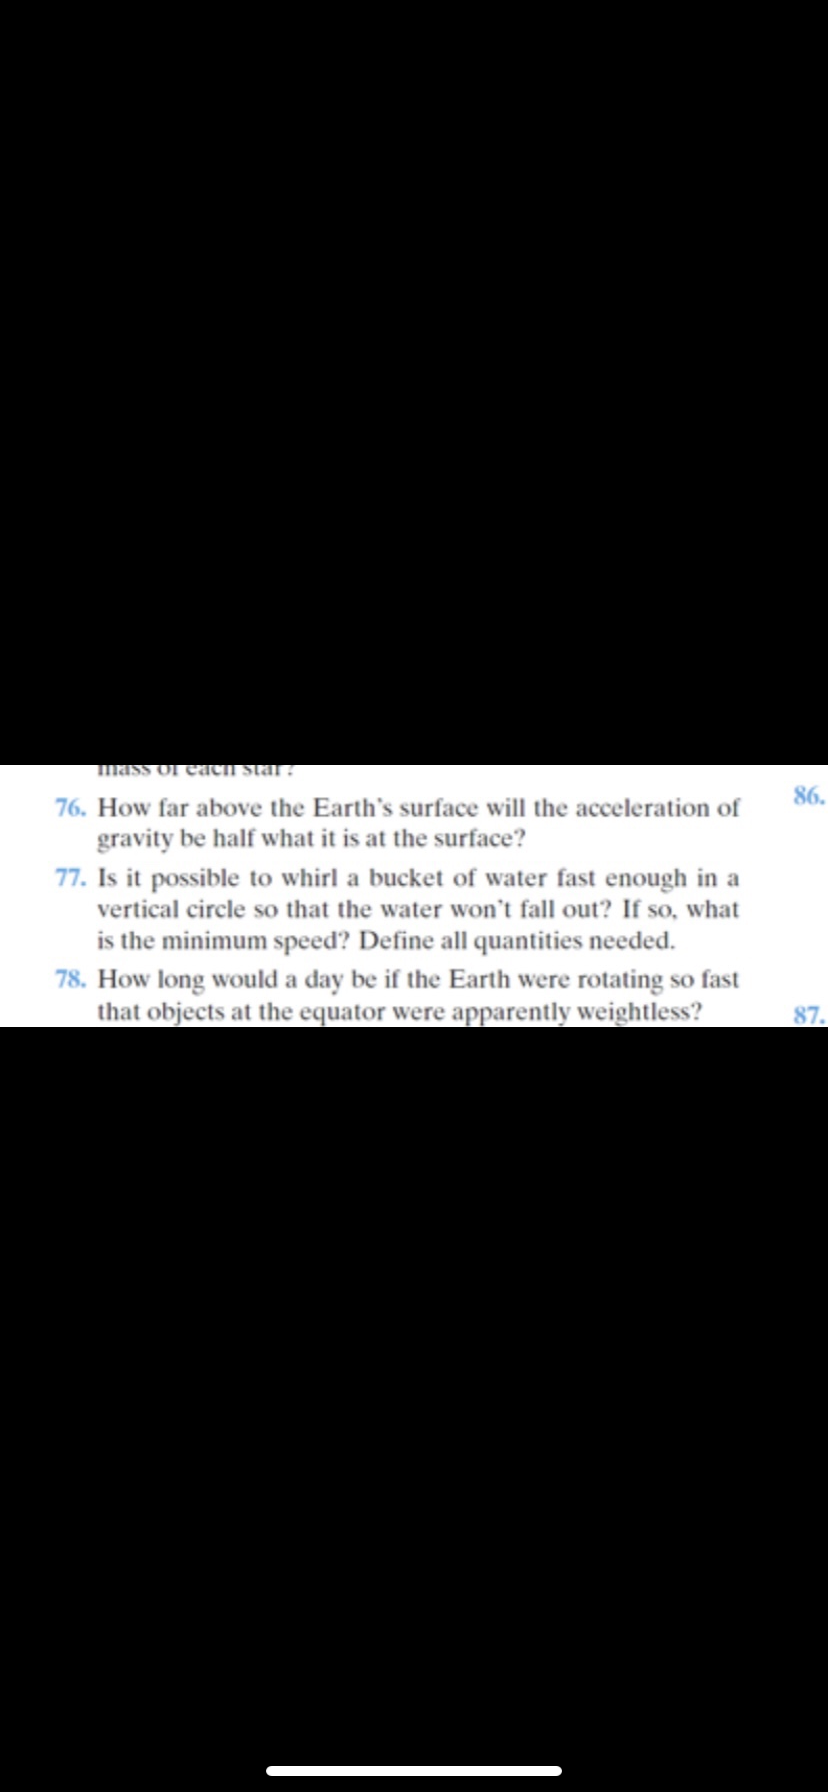 mass of eacI stal ?
86.
76. How far above the Earth's surface will the acceleration of
gravity be half what it is at the surface?
77. Is it possible to whirl a bucket of water fast enough in a
vertical circle so that the water won't fall out? If so, what
is the minimum speed? Define all quantities needed.
78. How long would a day be if the Earth were rotating so fast
that objects at the equator were apparently weightless?
